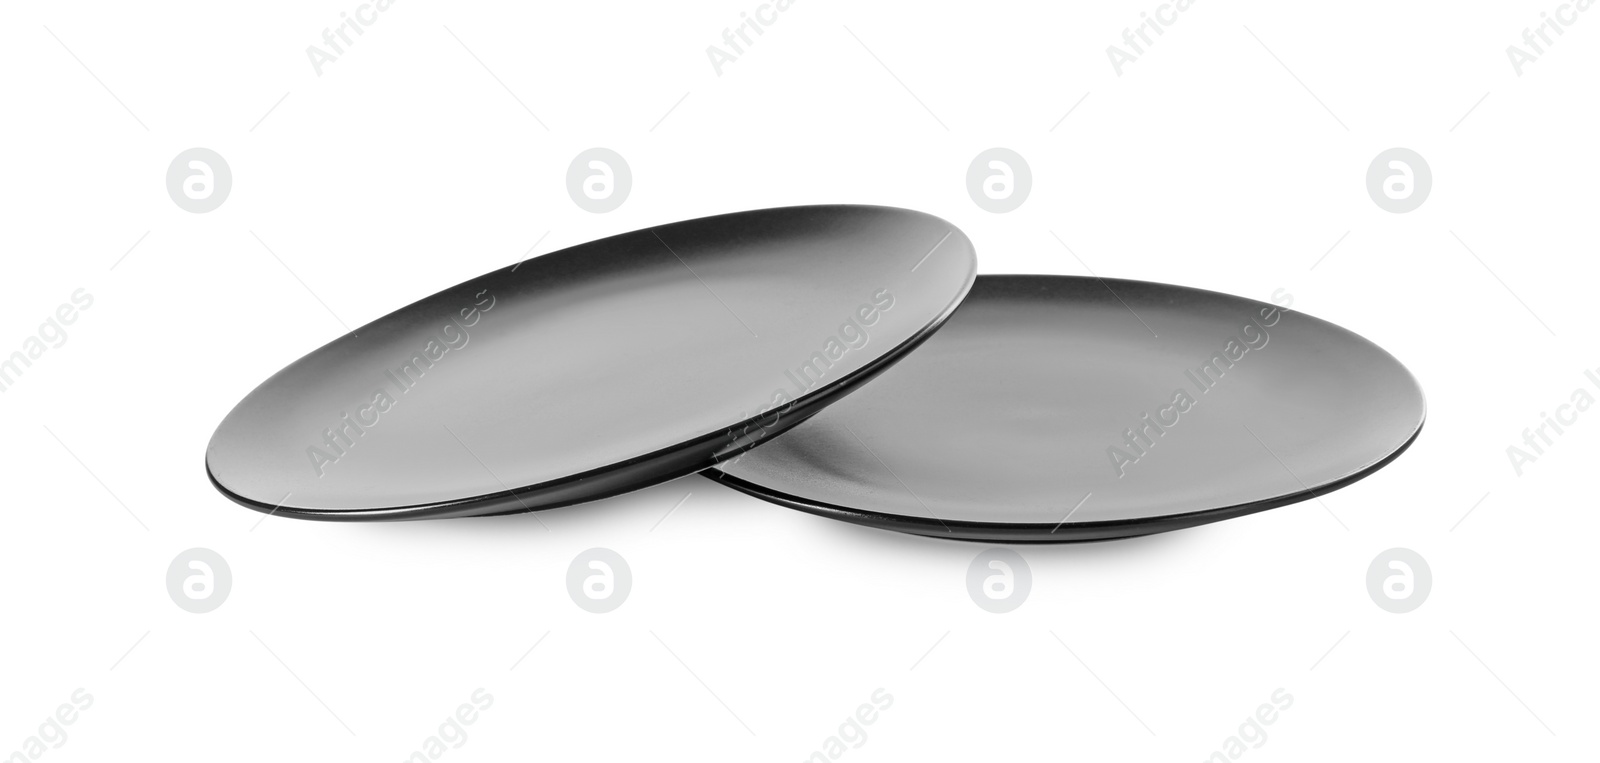 Photo of Two clean ceramic plates on white background